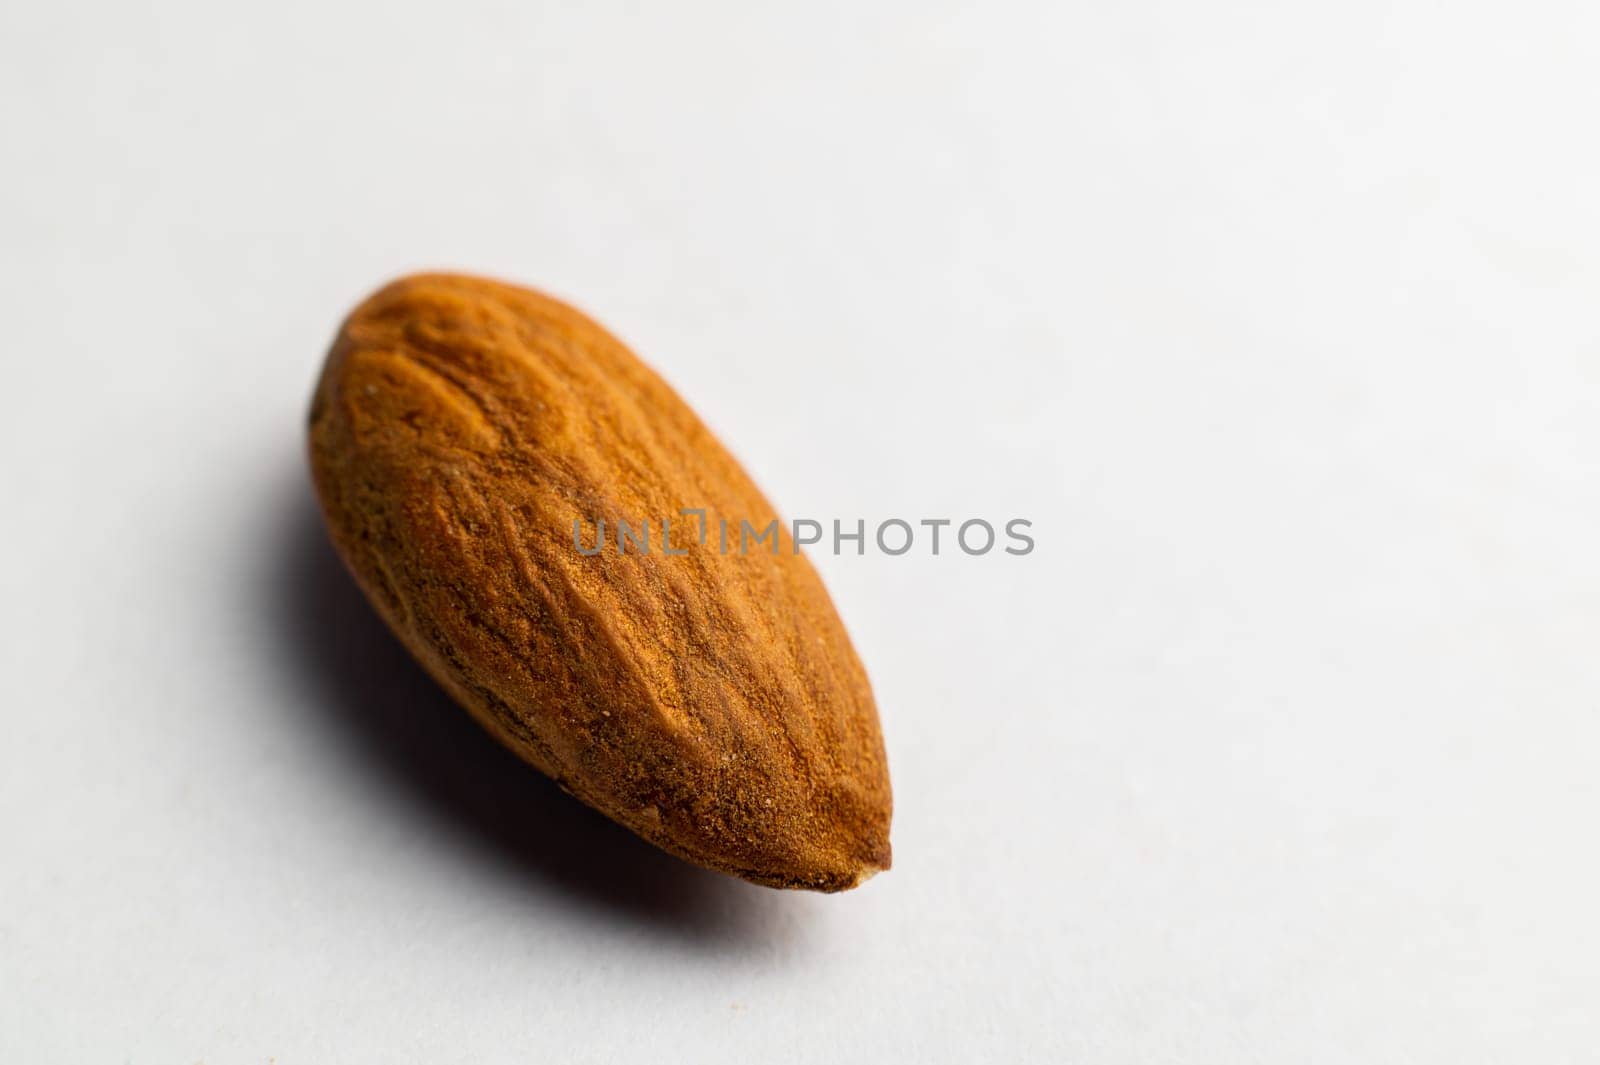 Almonds on a white background, close-up of the seed from the side. One nut macro shot by yanik88